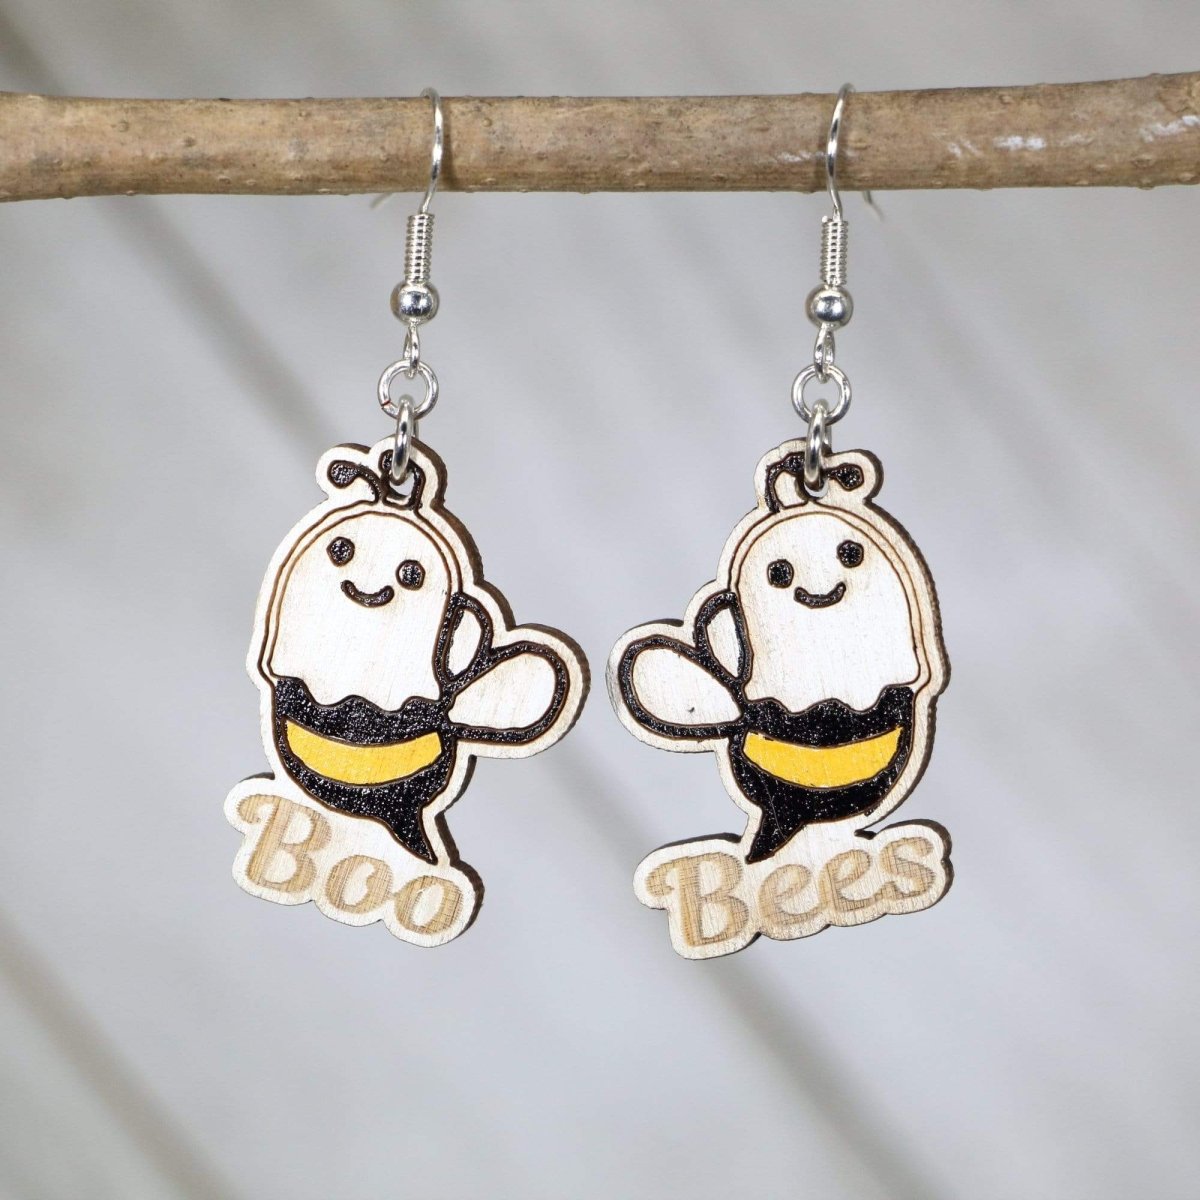 Boo Bees Wooden Dangle Earrings - - Cate's Concepts, LLC